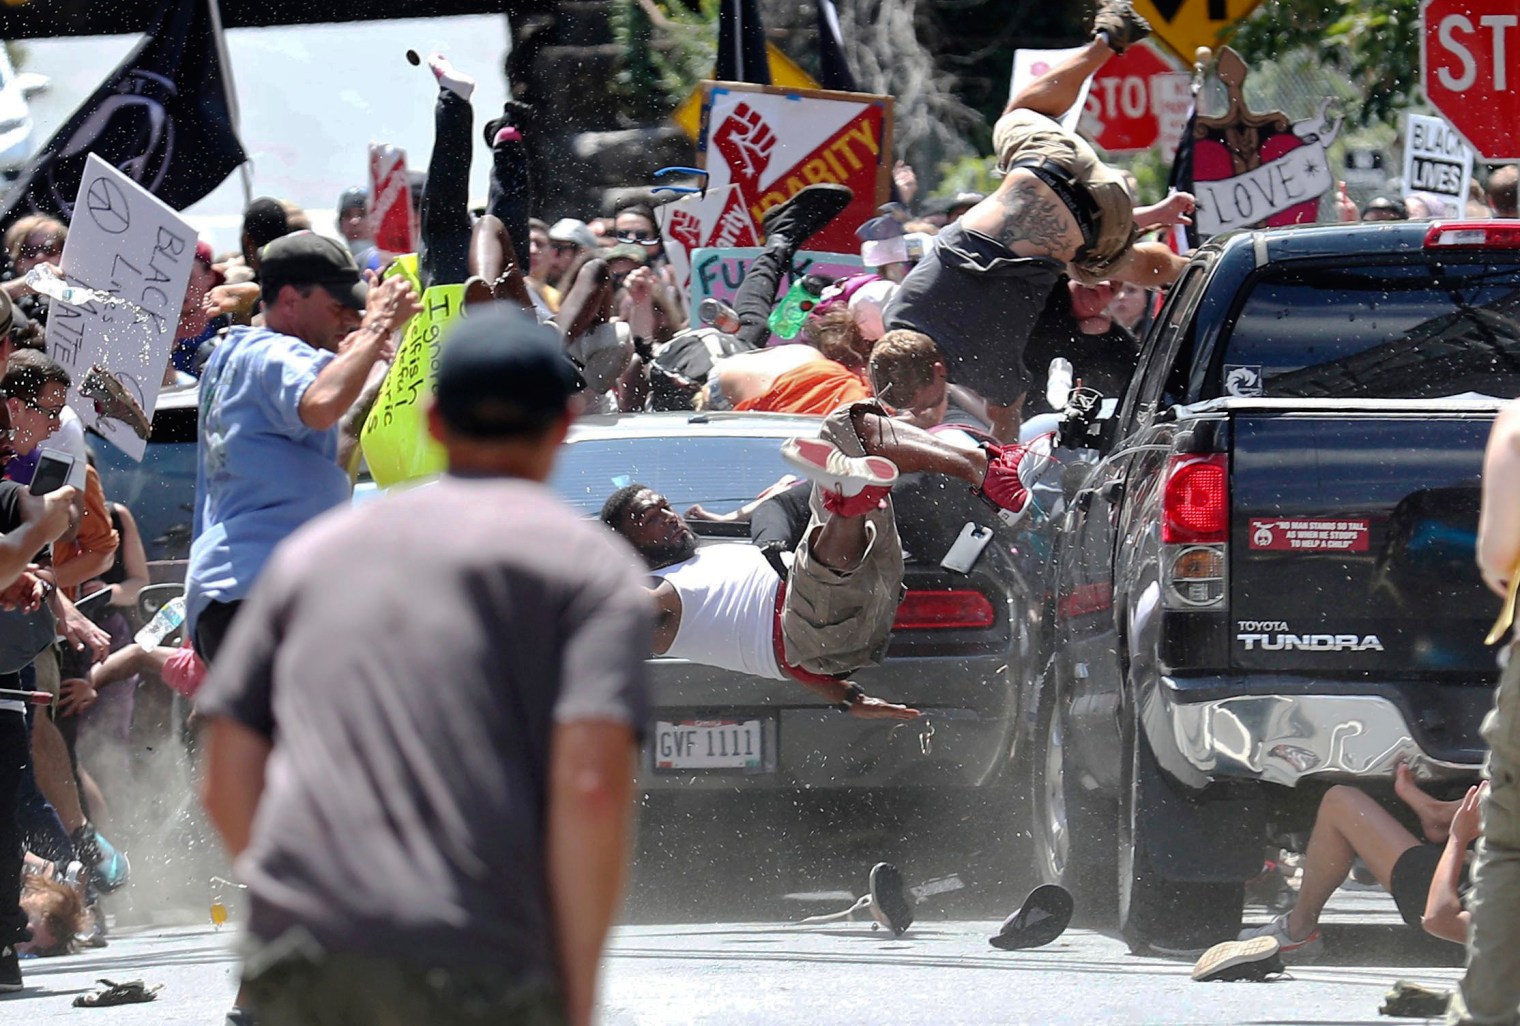 People fly into the air as a vehicle drives into a group of protesters demonstrating against a white nationalist rally